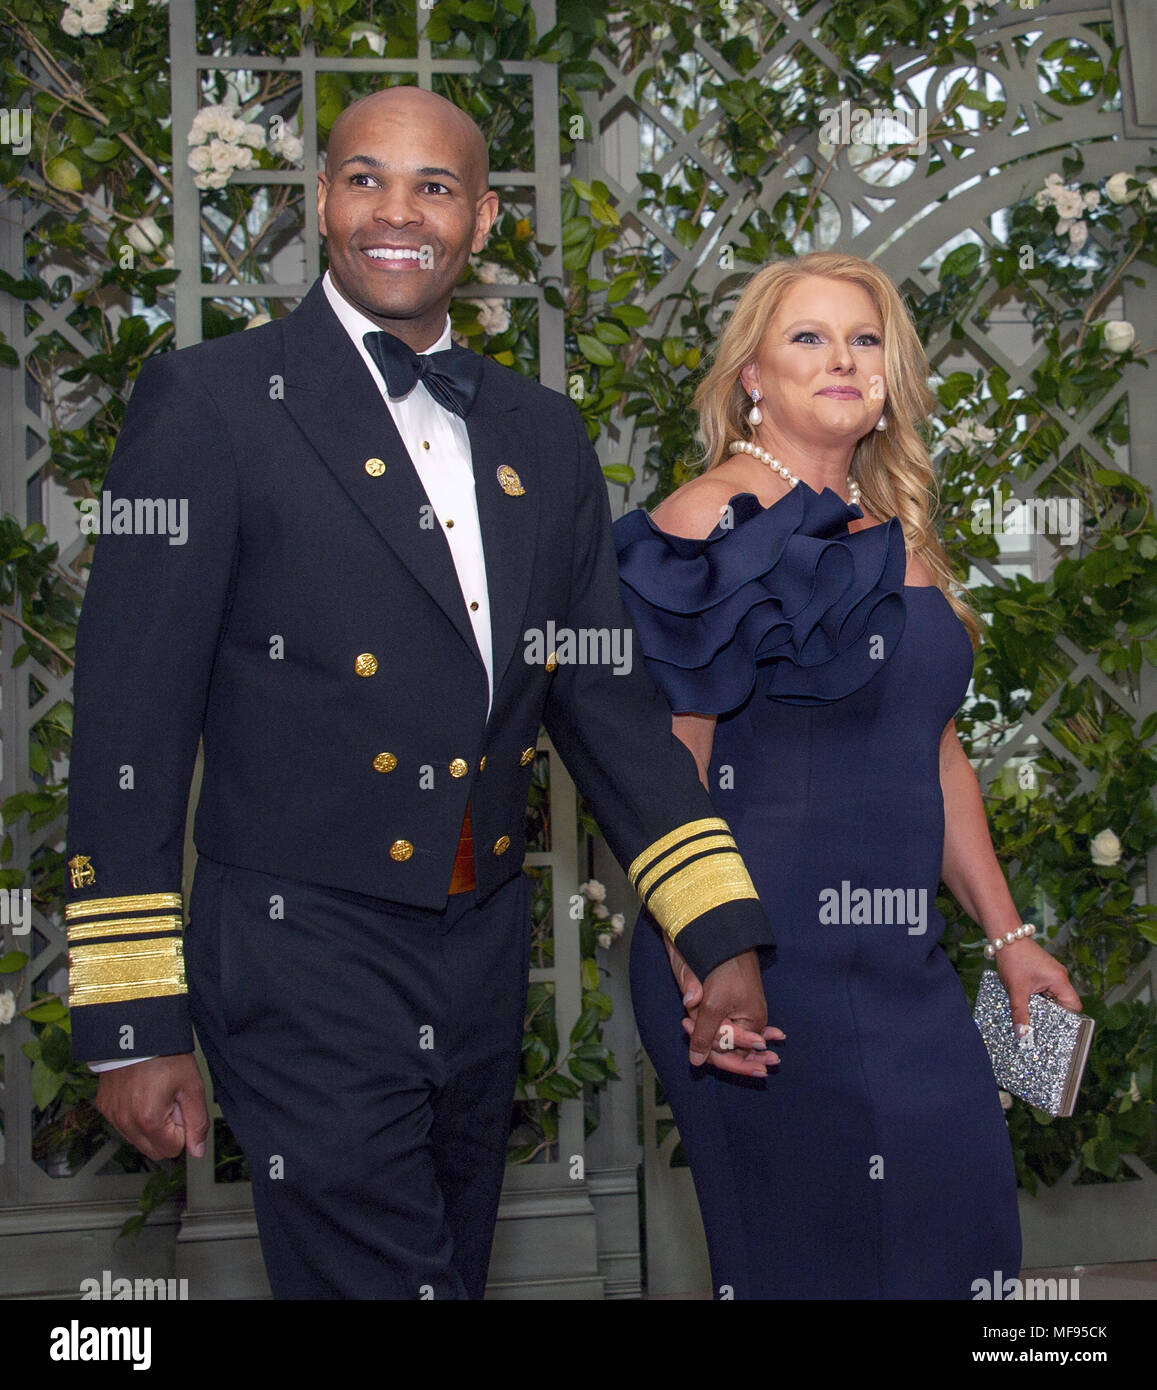 Washington, District of Columbia, USA. 24th Apr, 2018. United States Surgeon General Jerome Adams and Mrs. Lacey Adams arrive for the State Dinner honoring Dinner honoring President Emmanuel Macron of the French Republic and Mrs. Brigitte Macron at the White House in Washington, DC on Tuesday, April 24, 2018.Credit: Ron Sachs/CNP Credit: Ron Sachs/CNP/ZUMA Wire/Alamy Live News Stock Photo